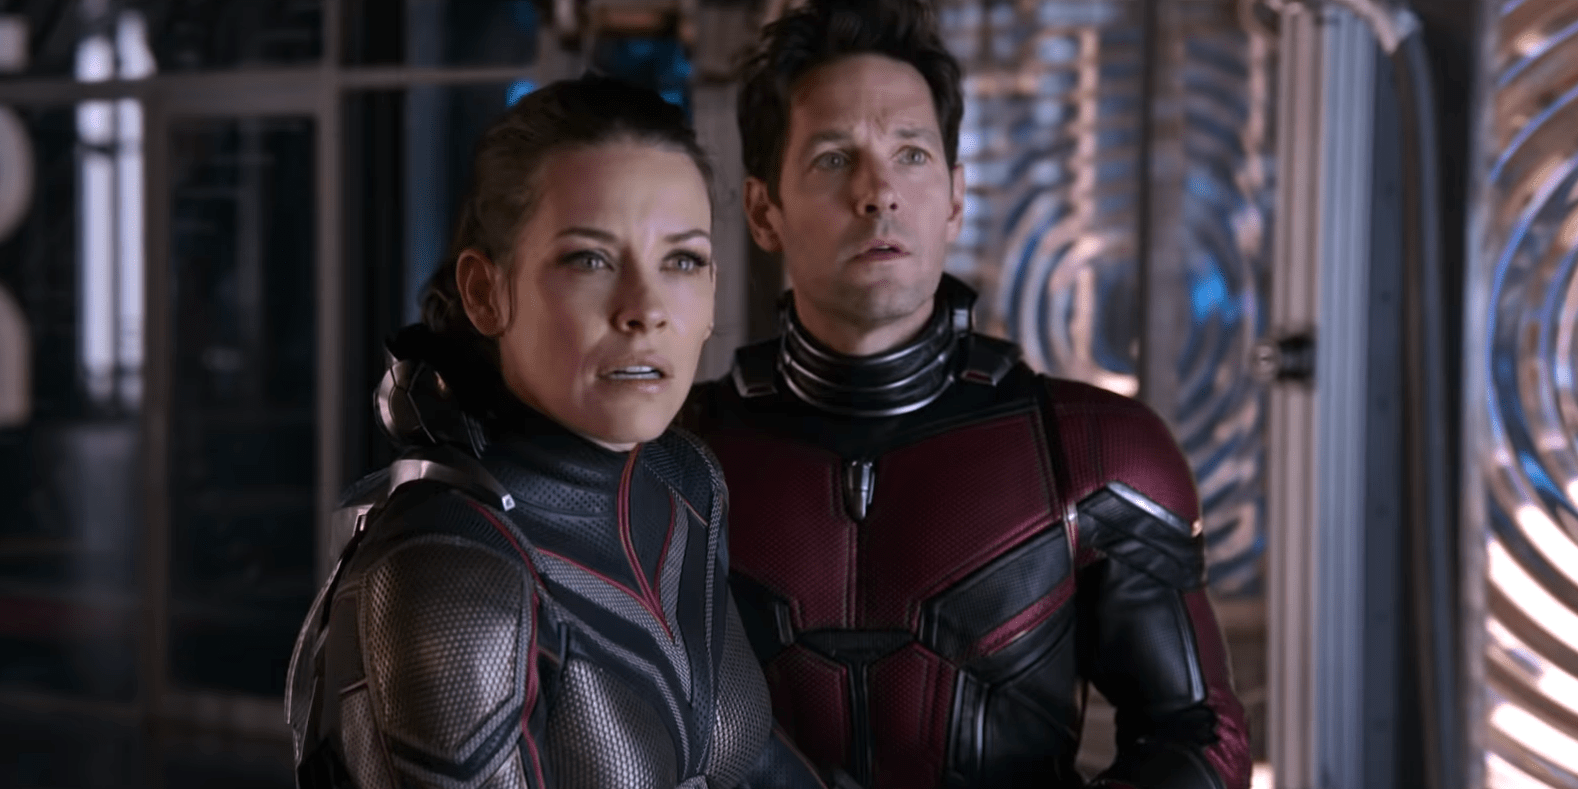 The Ant-Man 3 Director Confirmed Paul Rudd and Evangeline Lilly Will Share Equal Billing and I’m So Happy About It